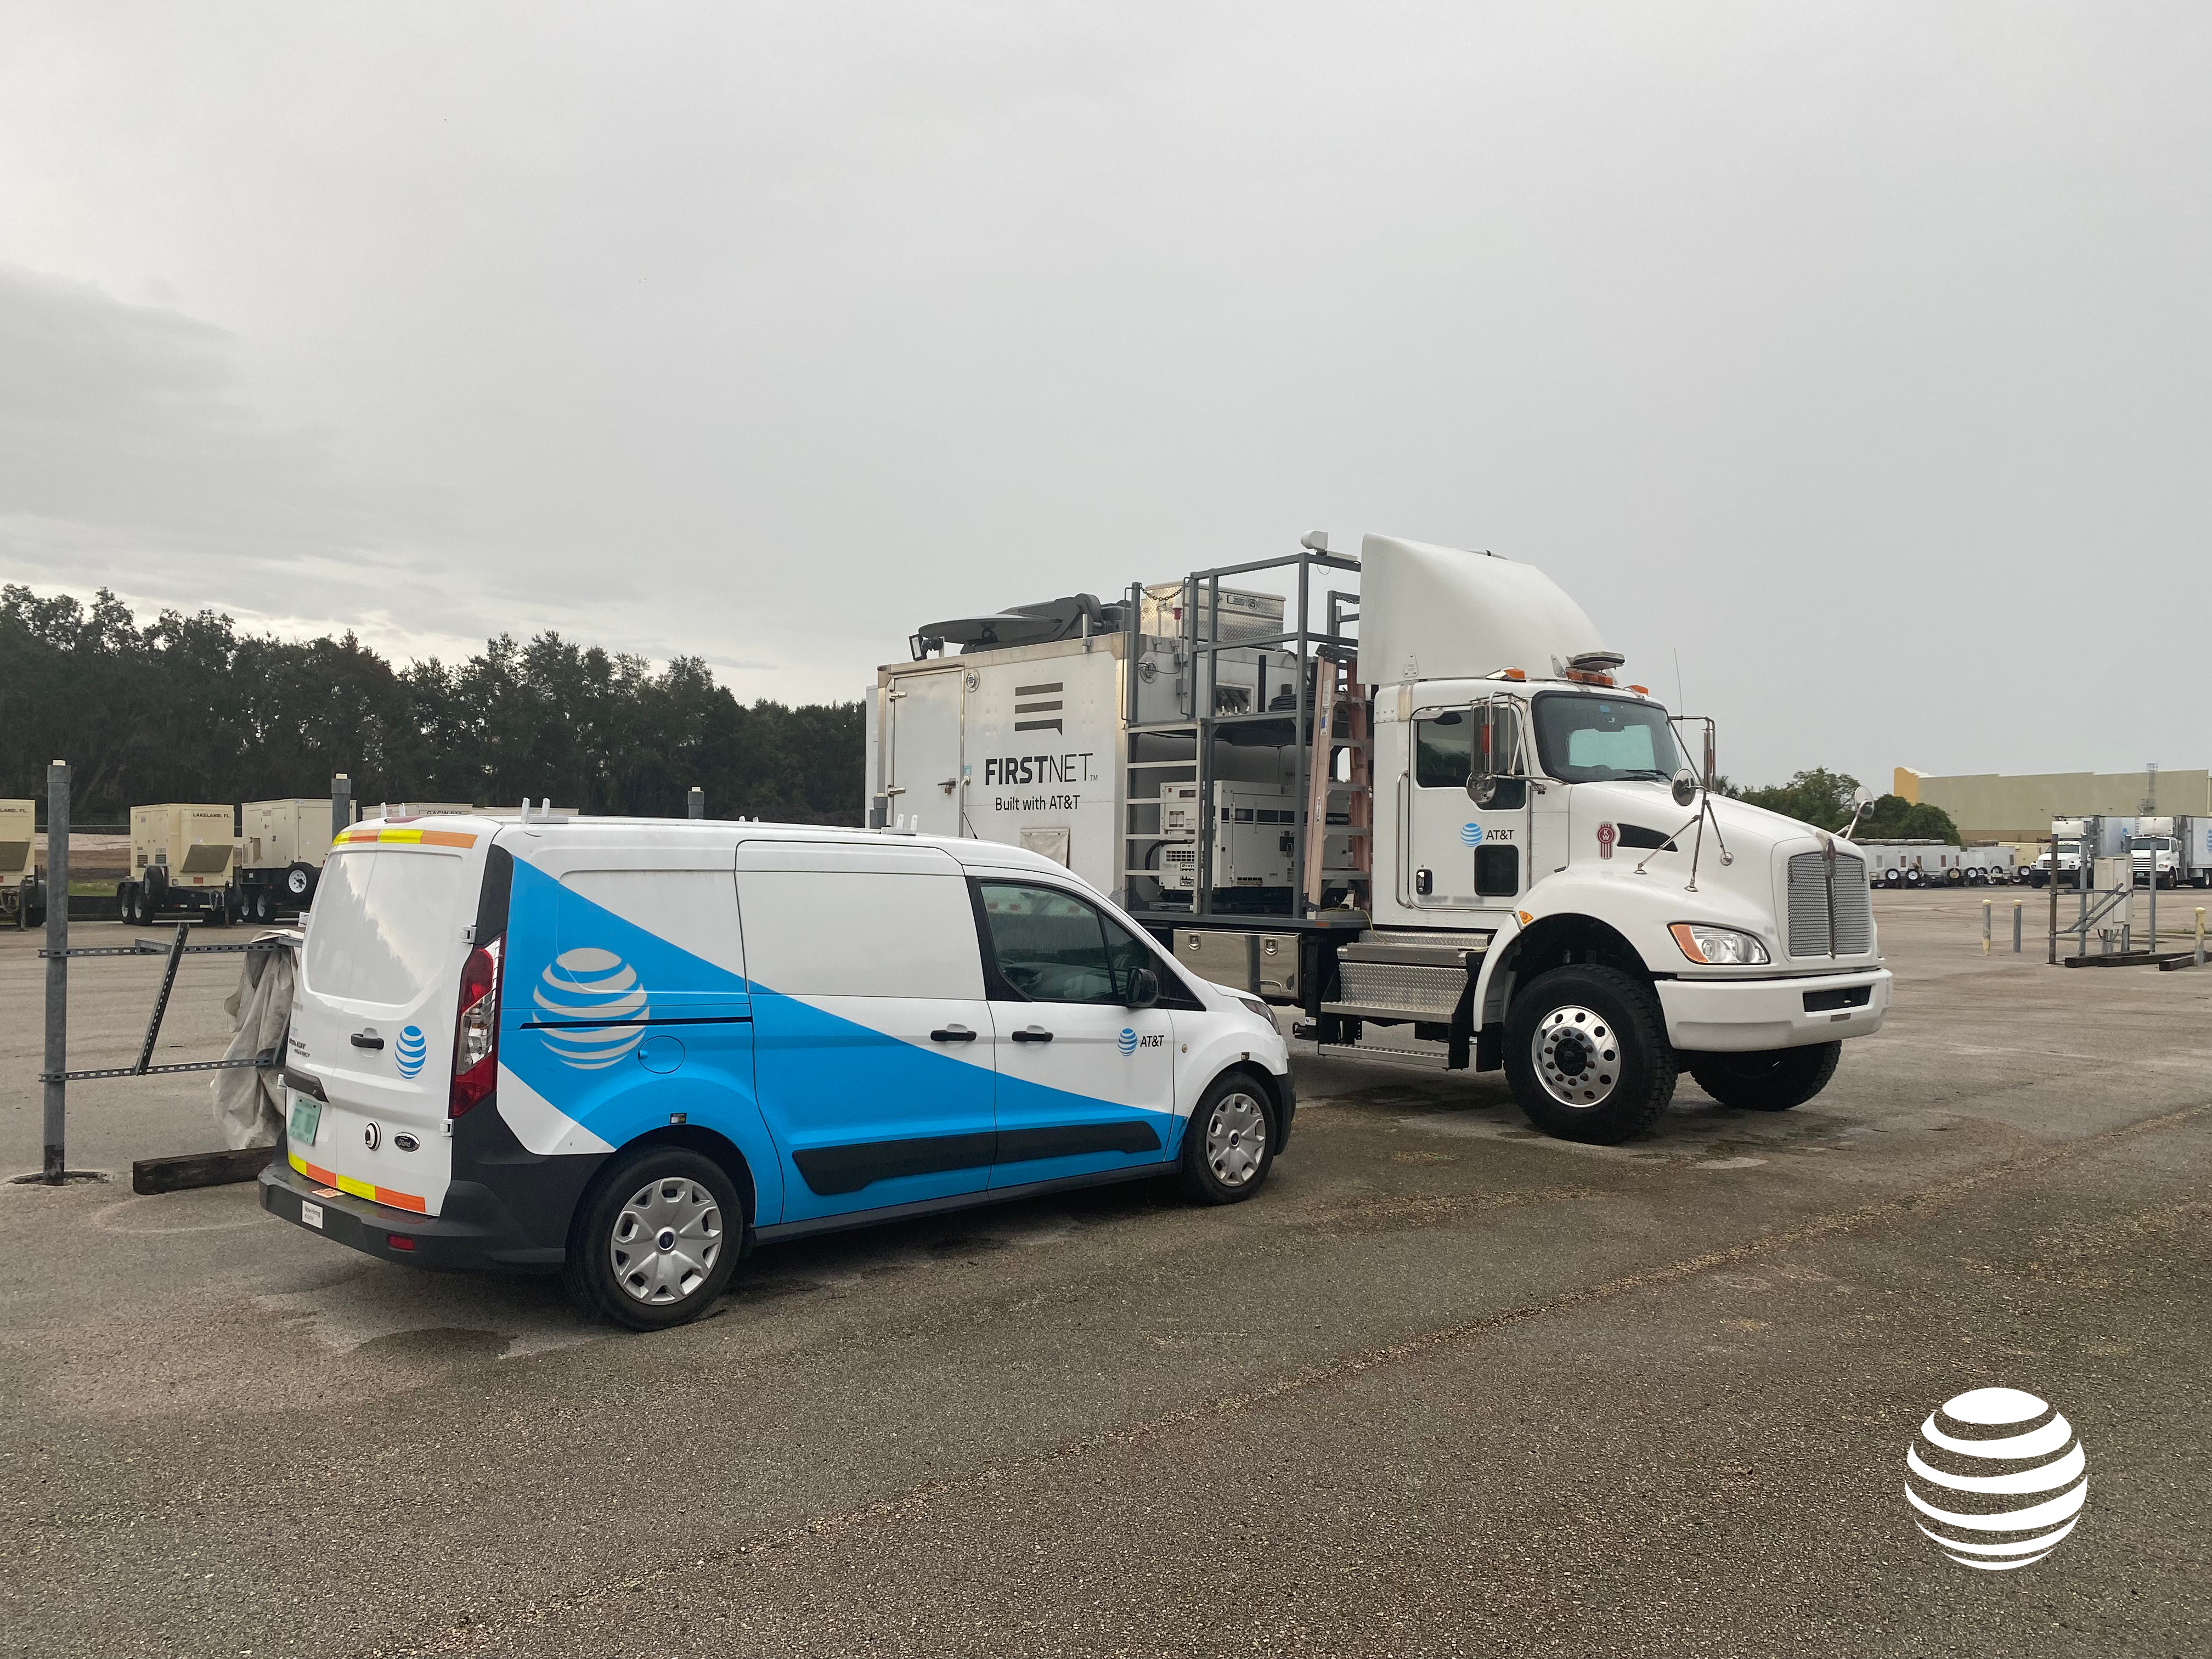 FirstNet SatCOLT  (Satellite Cell on Light Truck) and portable cell sites ready to deploy.